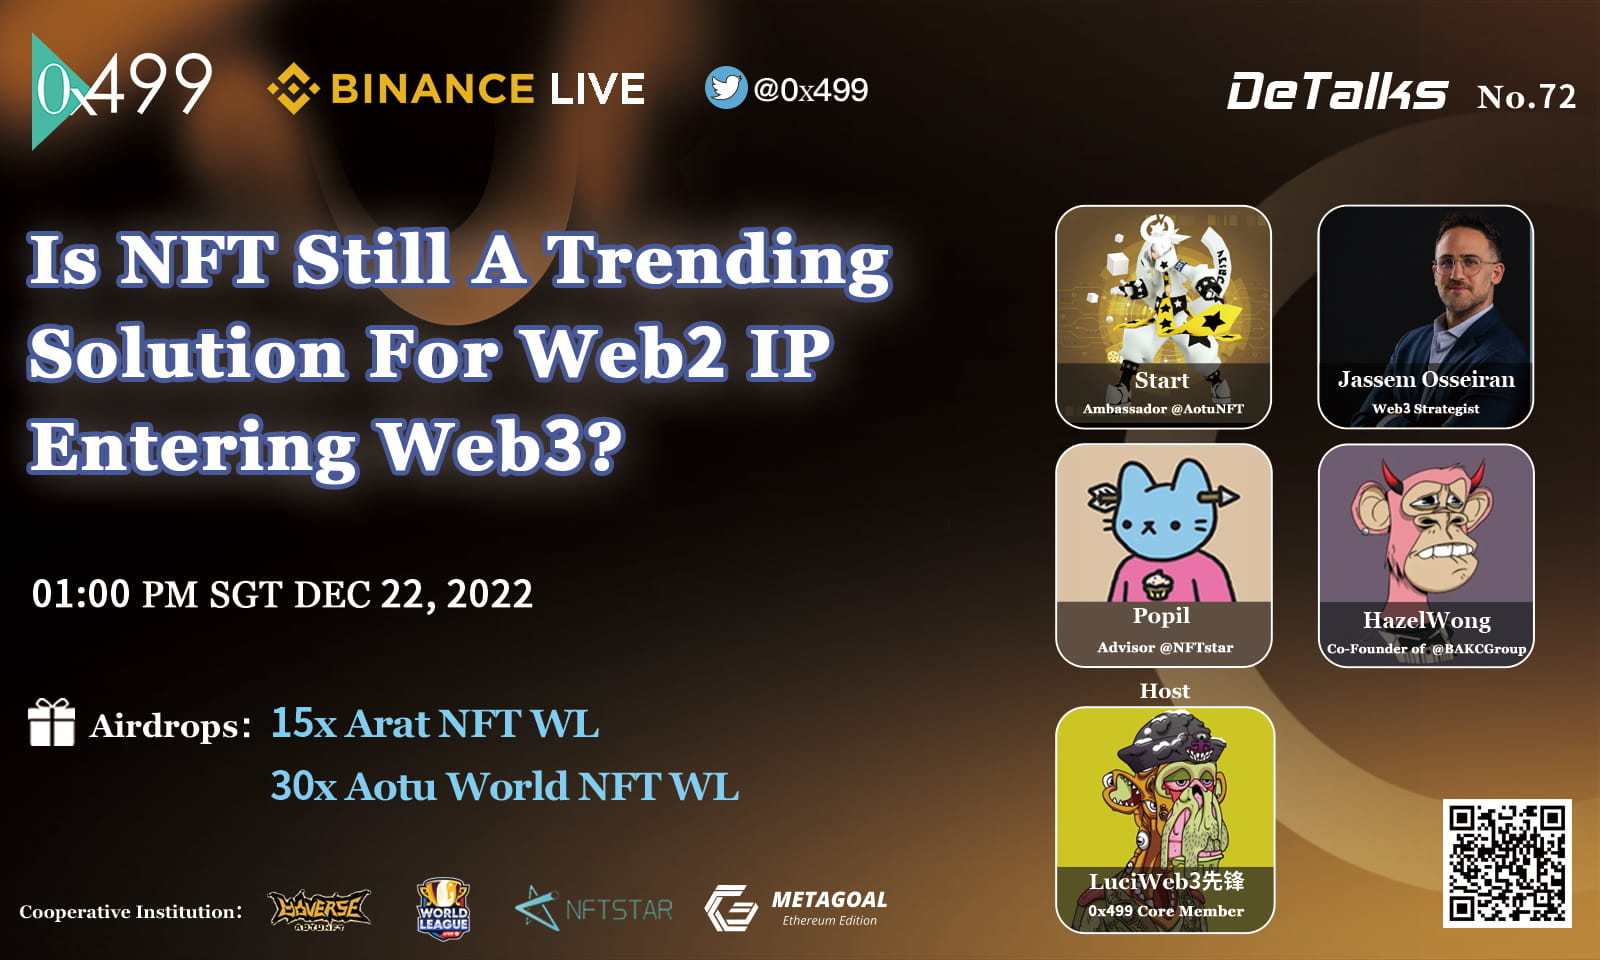 0x499: Is NFT Still A Trending Solution For Web2 IP Entering Web3?